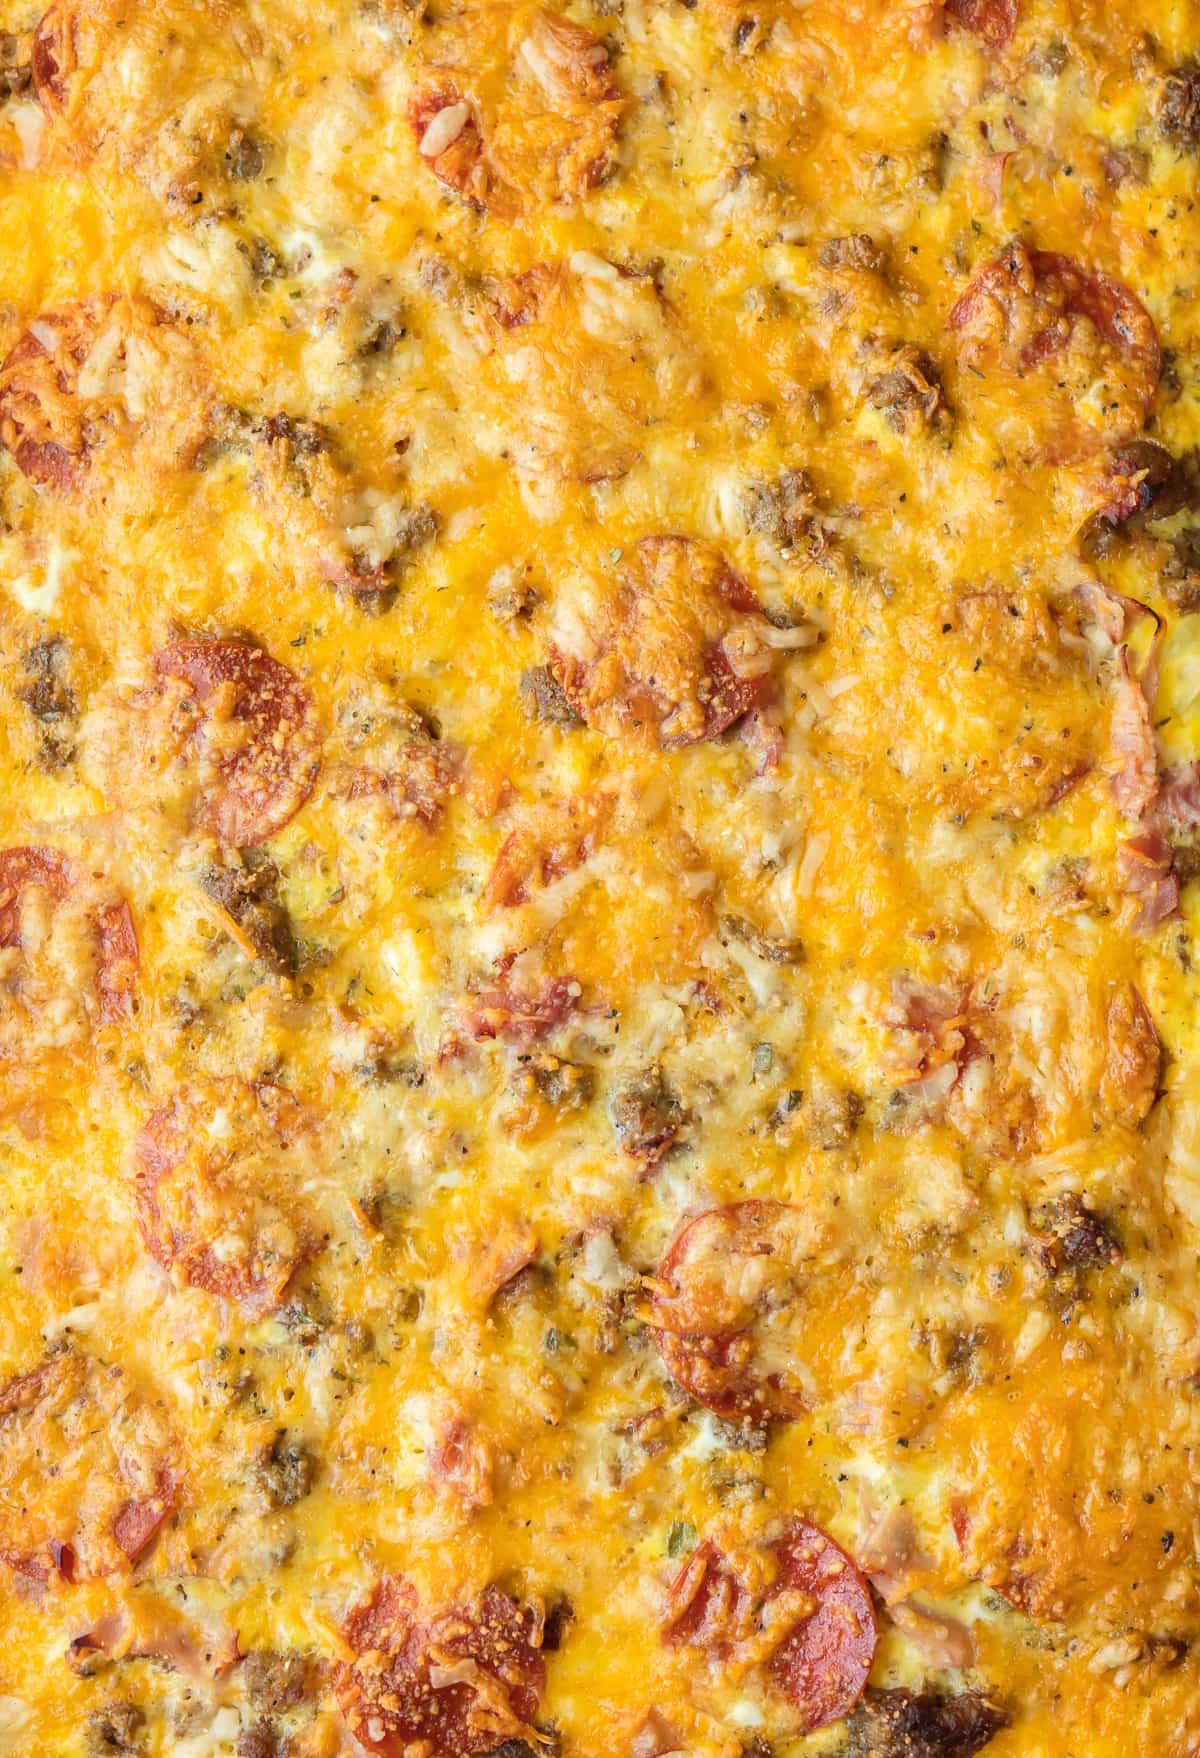 Meat Lovers Breakfast Pizza: egg, cheese, pepperoni, sausage, bacon, hash browns